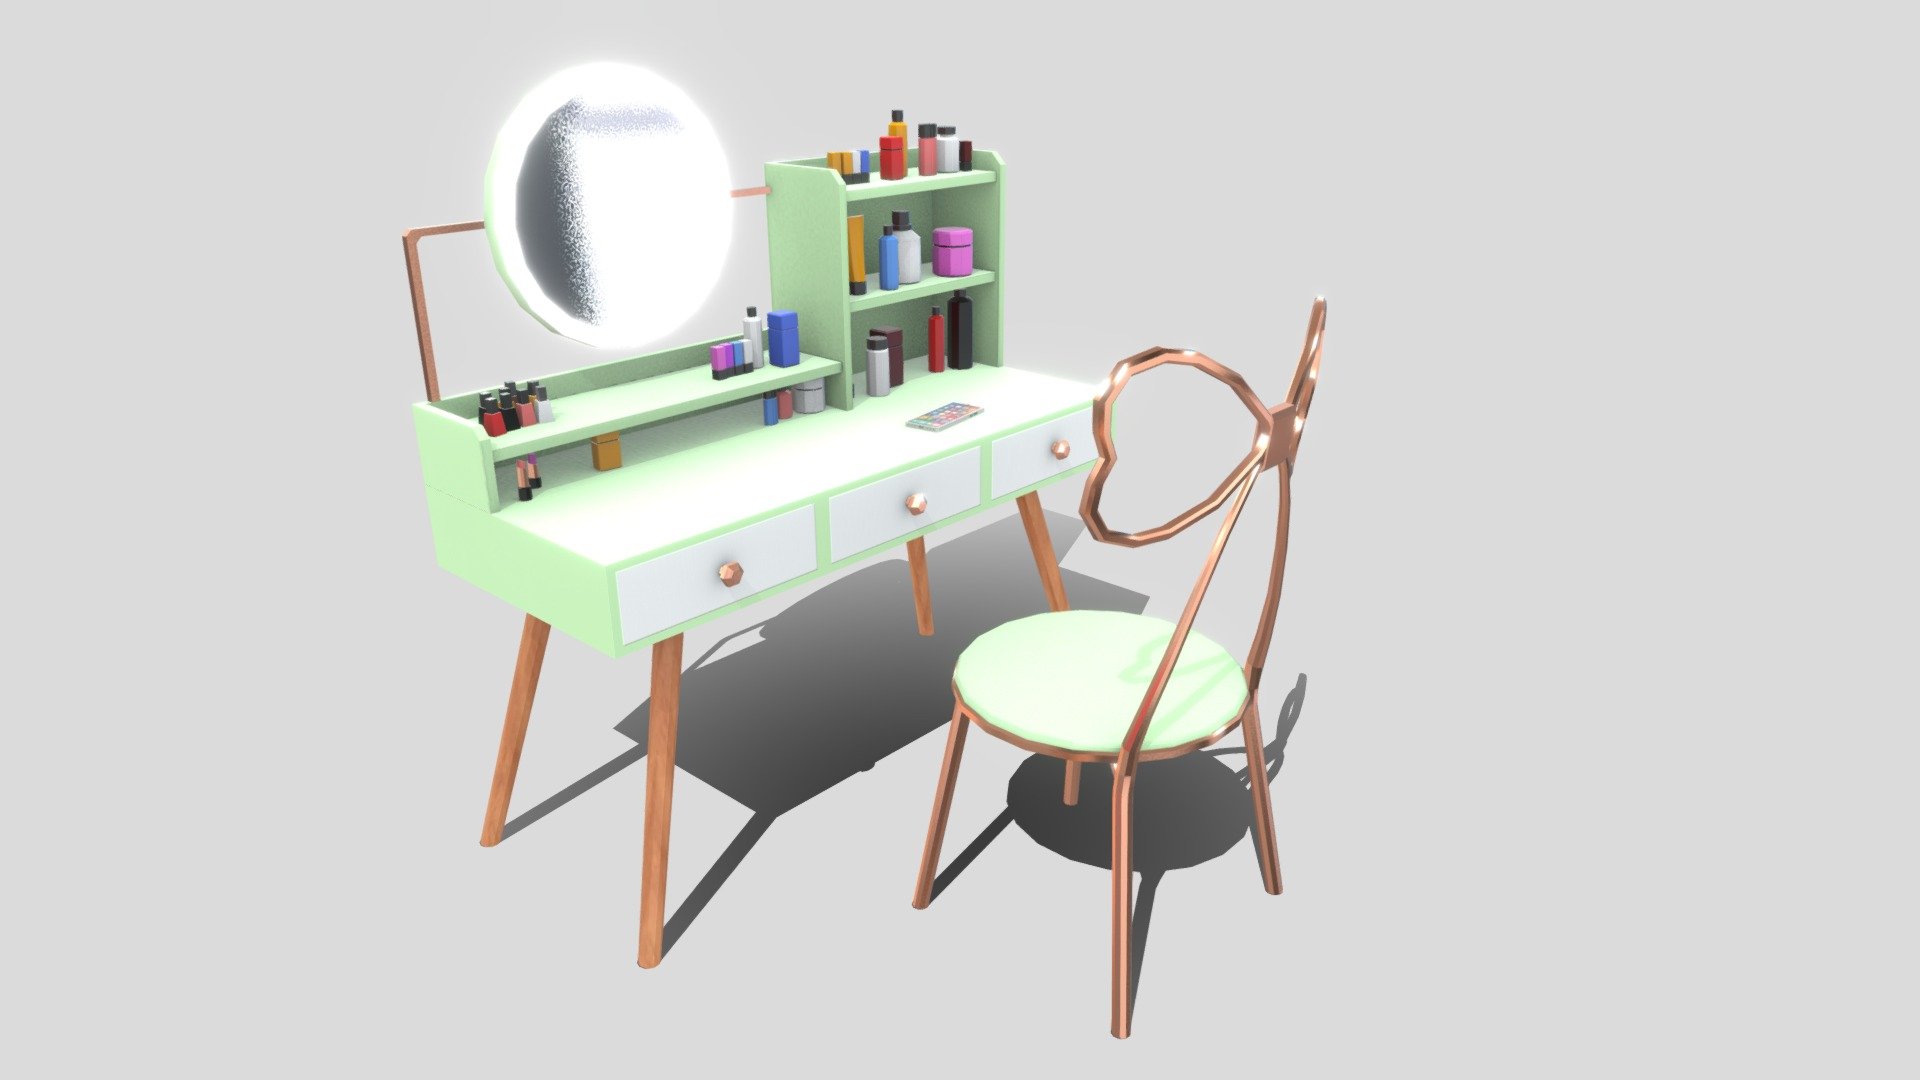 This is model of the cosmetic table. Model was made as a low poly.

This asset pack contains:

Model of the comsetic table with accessories and chair.

Technical information:

Texture 2048x2048 ( one pack )

The textures include emission map.

Cosmetic table - 956 tris, 549 faces, 515 verts.

Chair - 1540 tris, 820 faces, 780 verts.

accesoriess - 3424 tris, 1882 faces, 1790 verts.

Contact details:

lukas.boban123@gmail.com

07591664224

https://www.facebook.com/lukas.boban/

Thank you for taking look please consider leave like 3d model